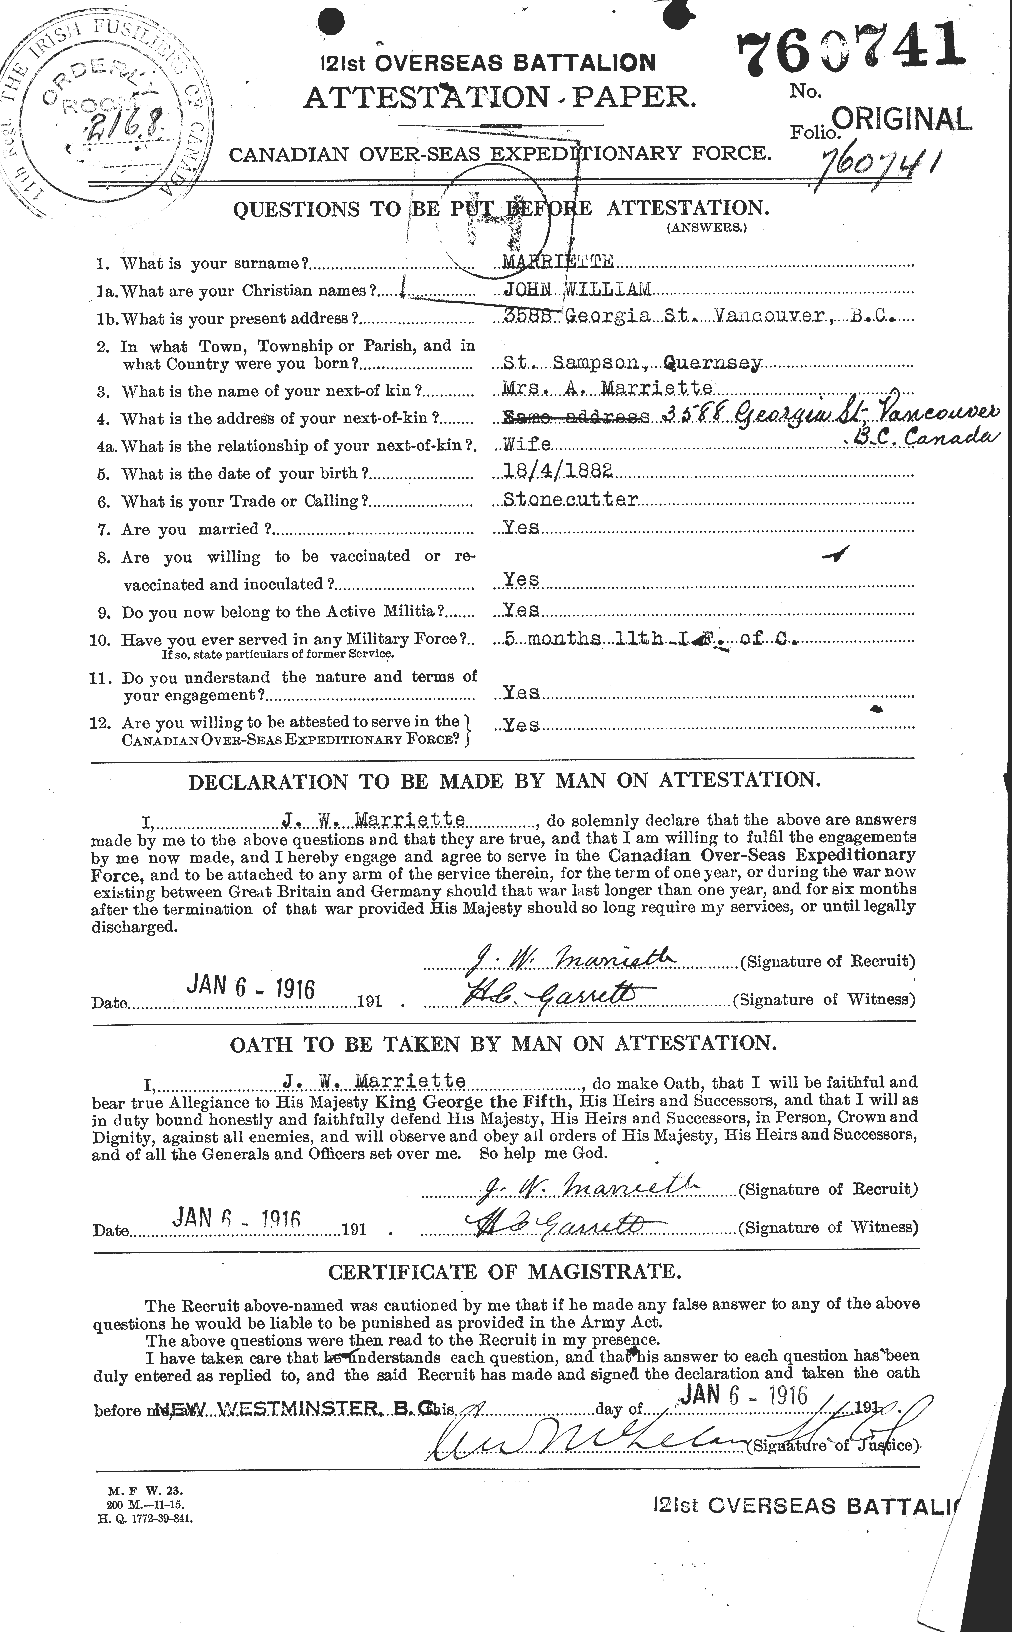 Personnel Records of the First World War - CEF 486729a